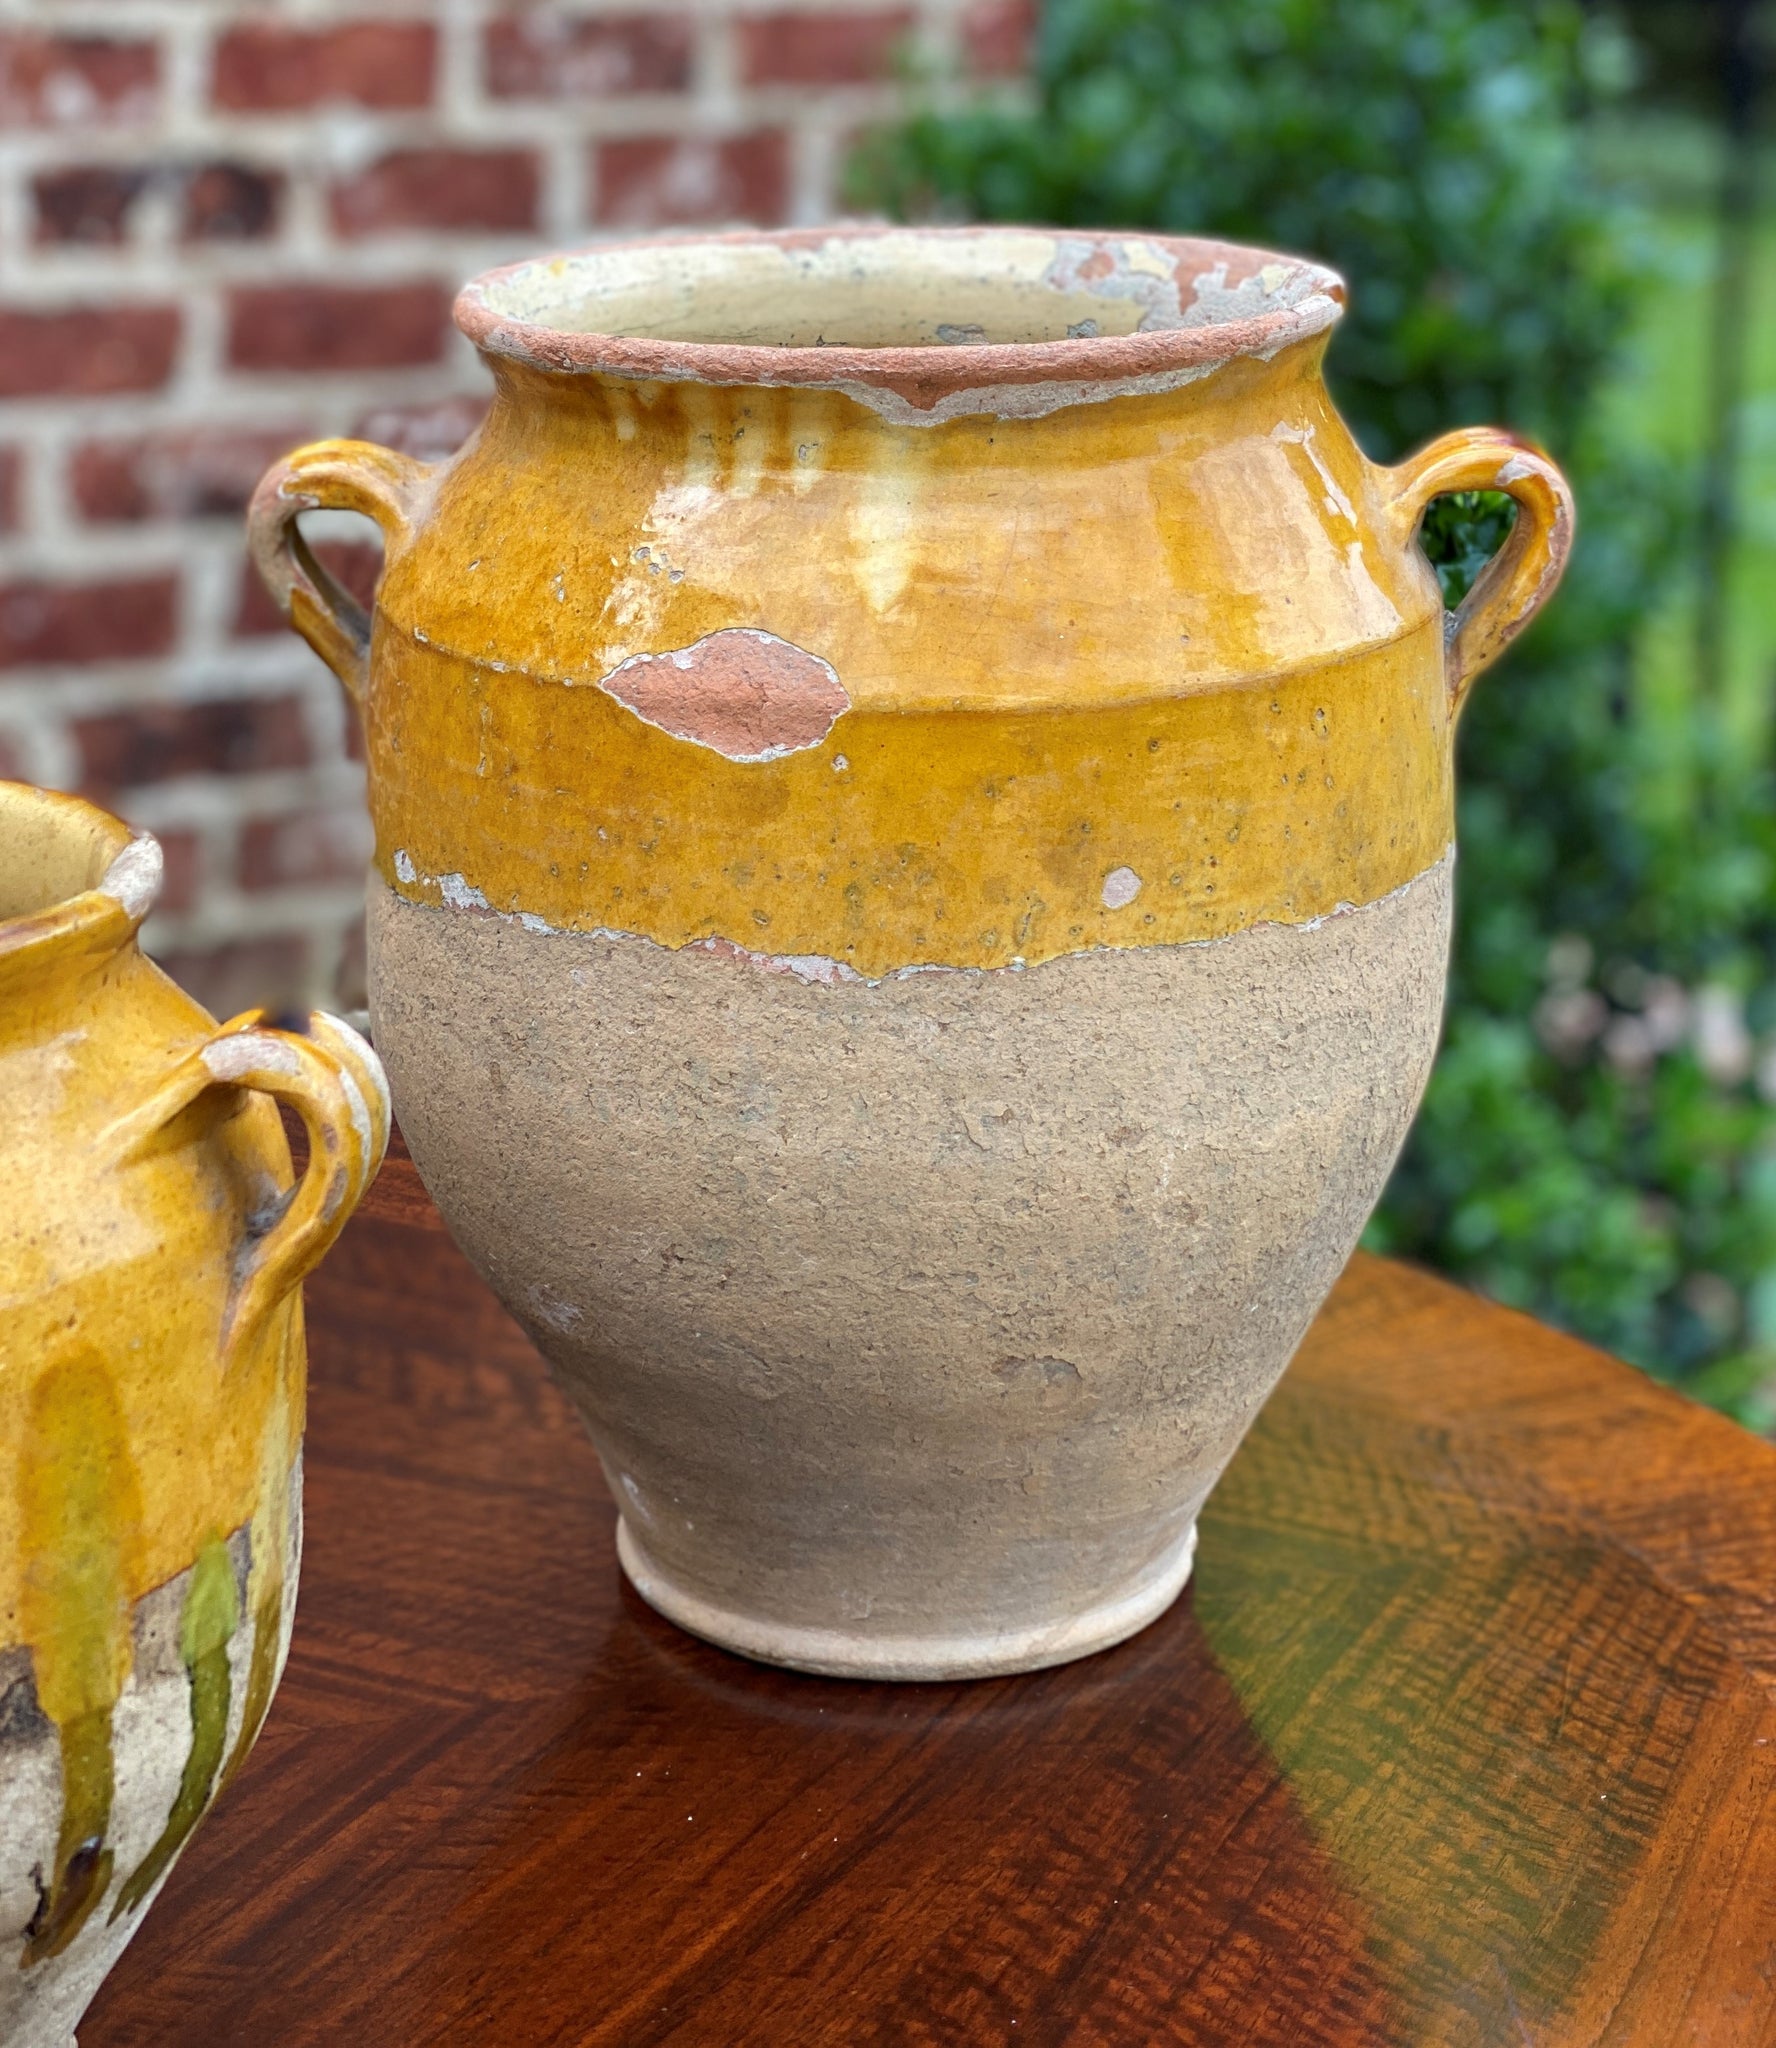 French Terracotta Pots - Set of 3